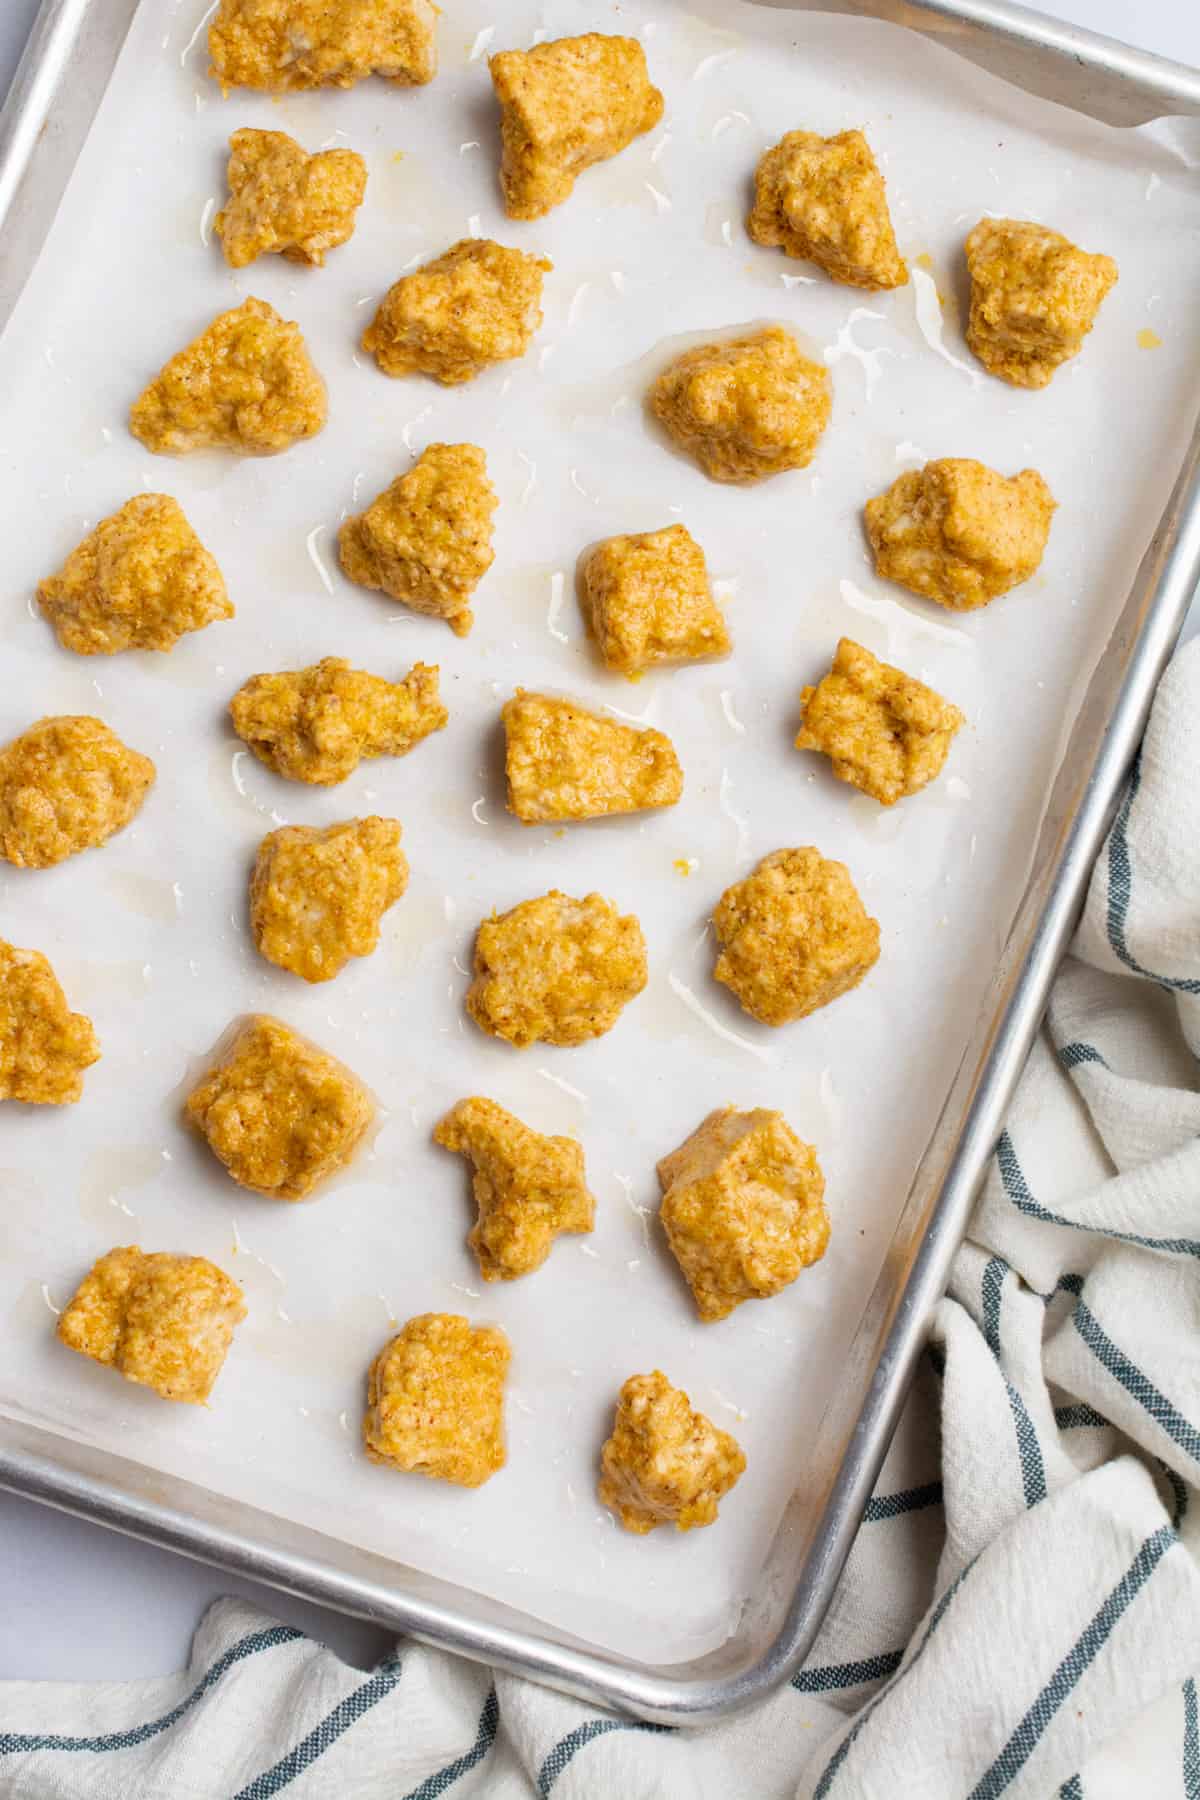 Breaded tofu nuggets on a baking sheet before baking.